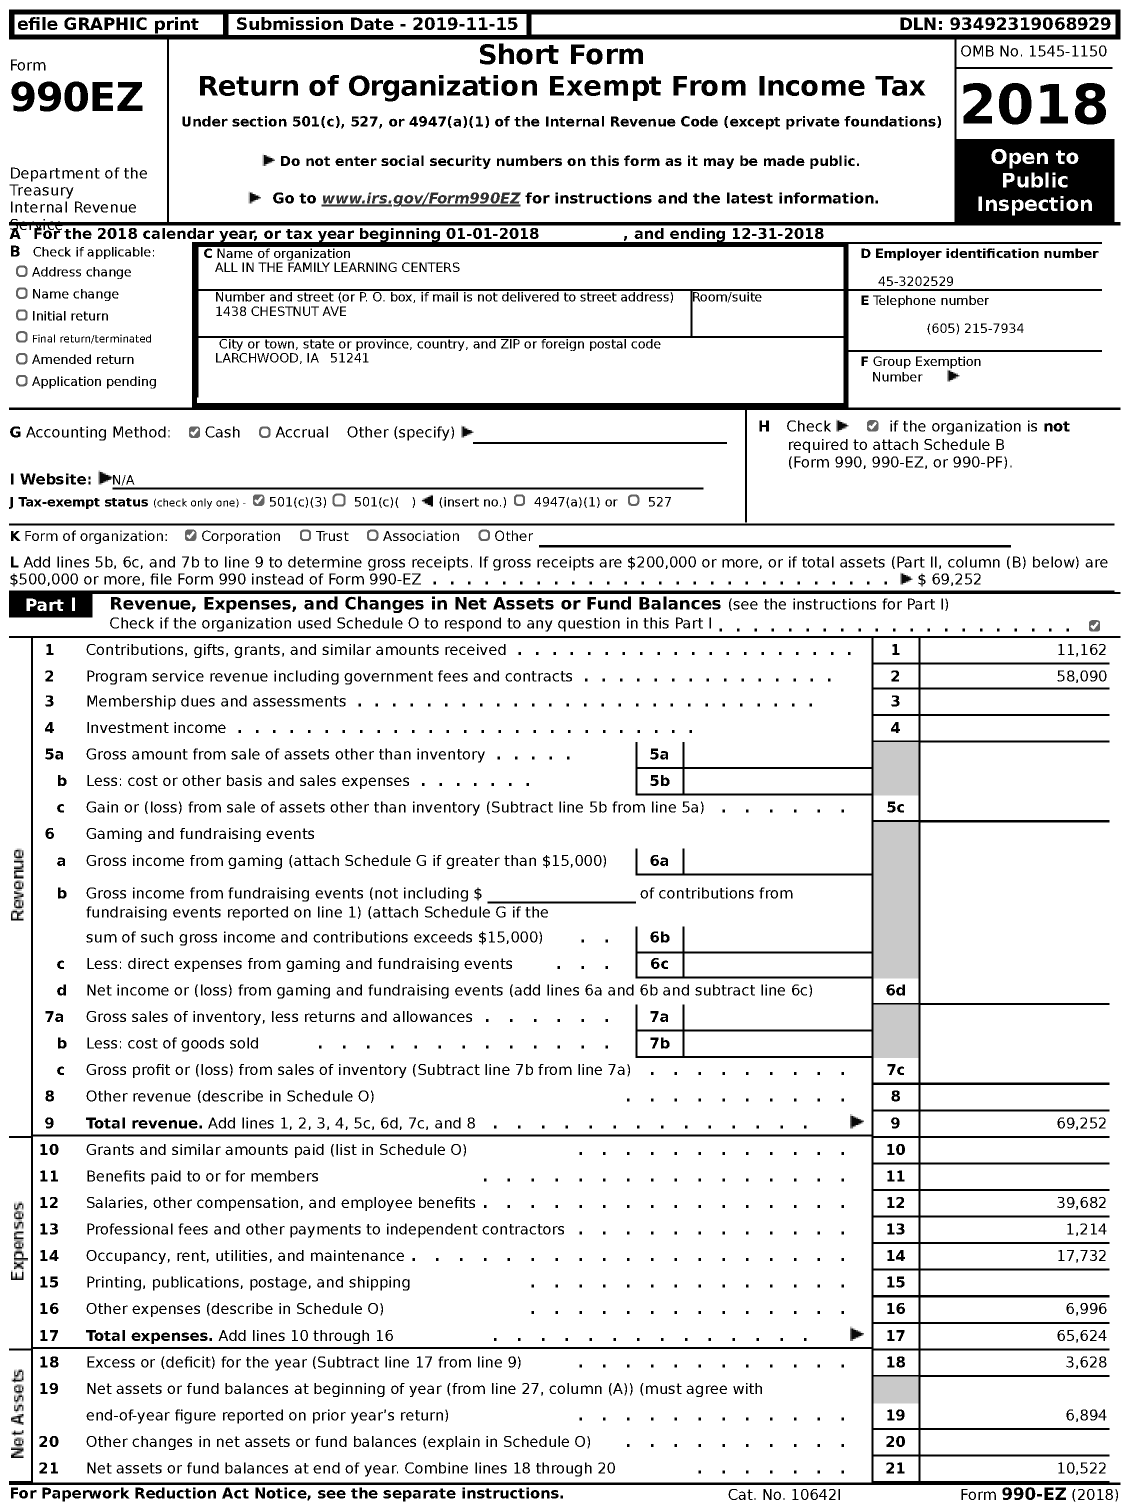 Image of first page of 2018 Form 990EZ for All in the Family Learning Centers